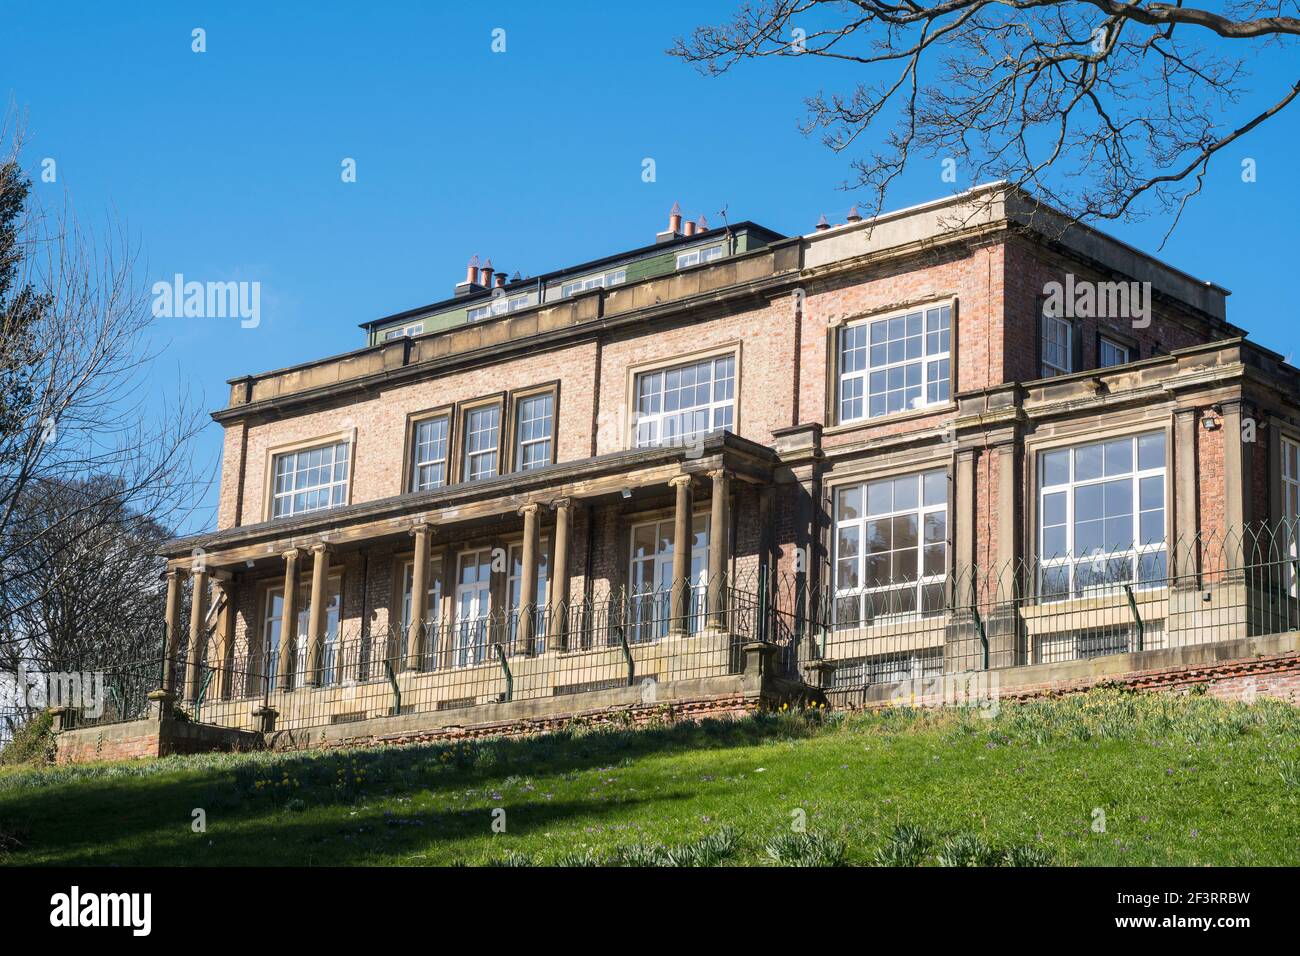 Ashburne House, a grade II Listed building, seen from Backhouse Park in Sunderland, north east England, UK Stock Photo